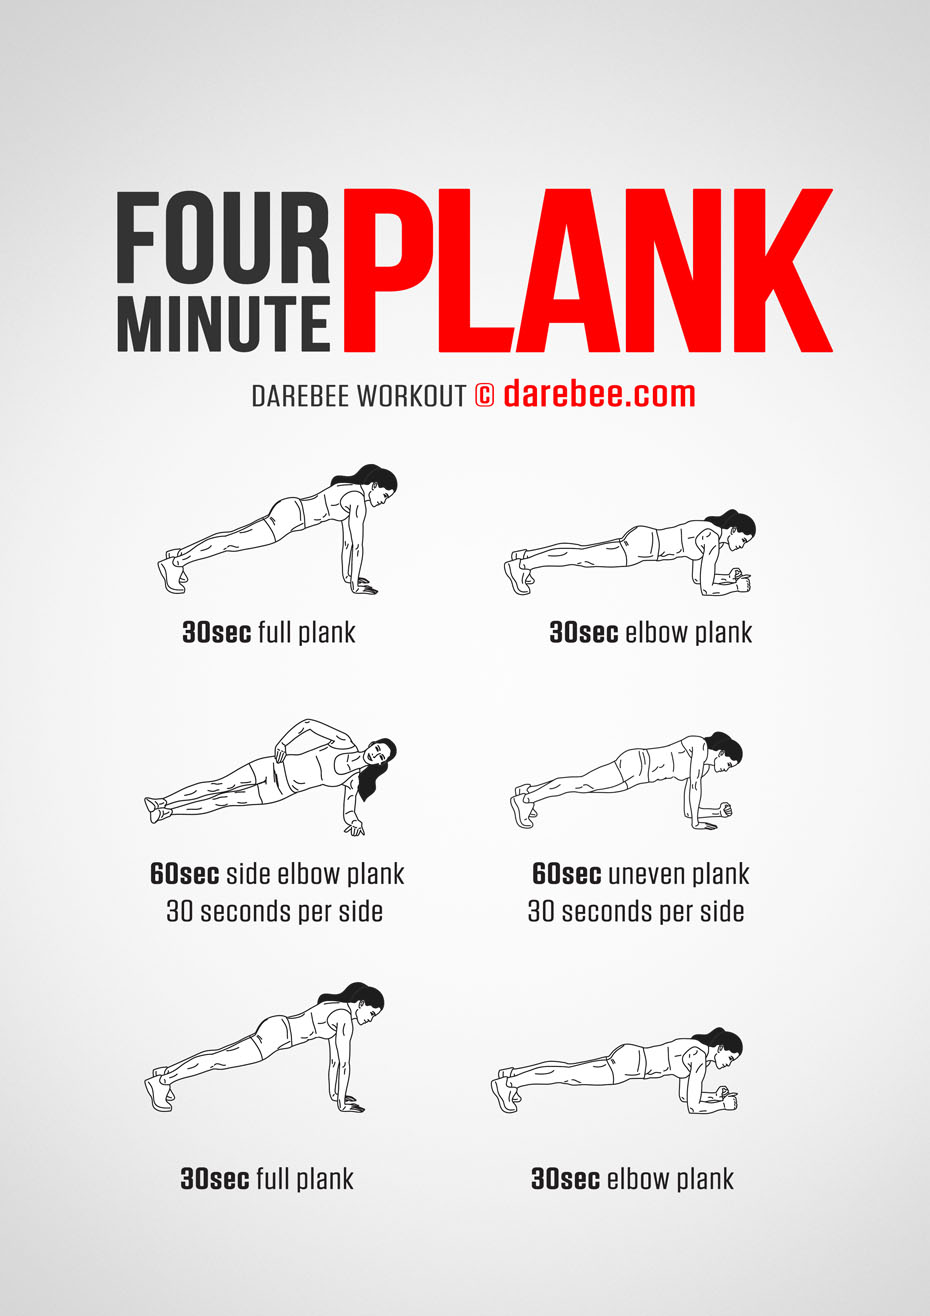 4-Minute Plank is a DAREBEE home fitness strong abs exercises workout that helps you develop a strong core and powerful abs.